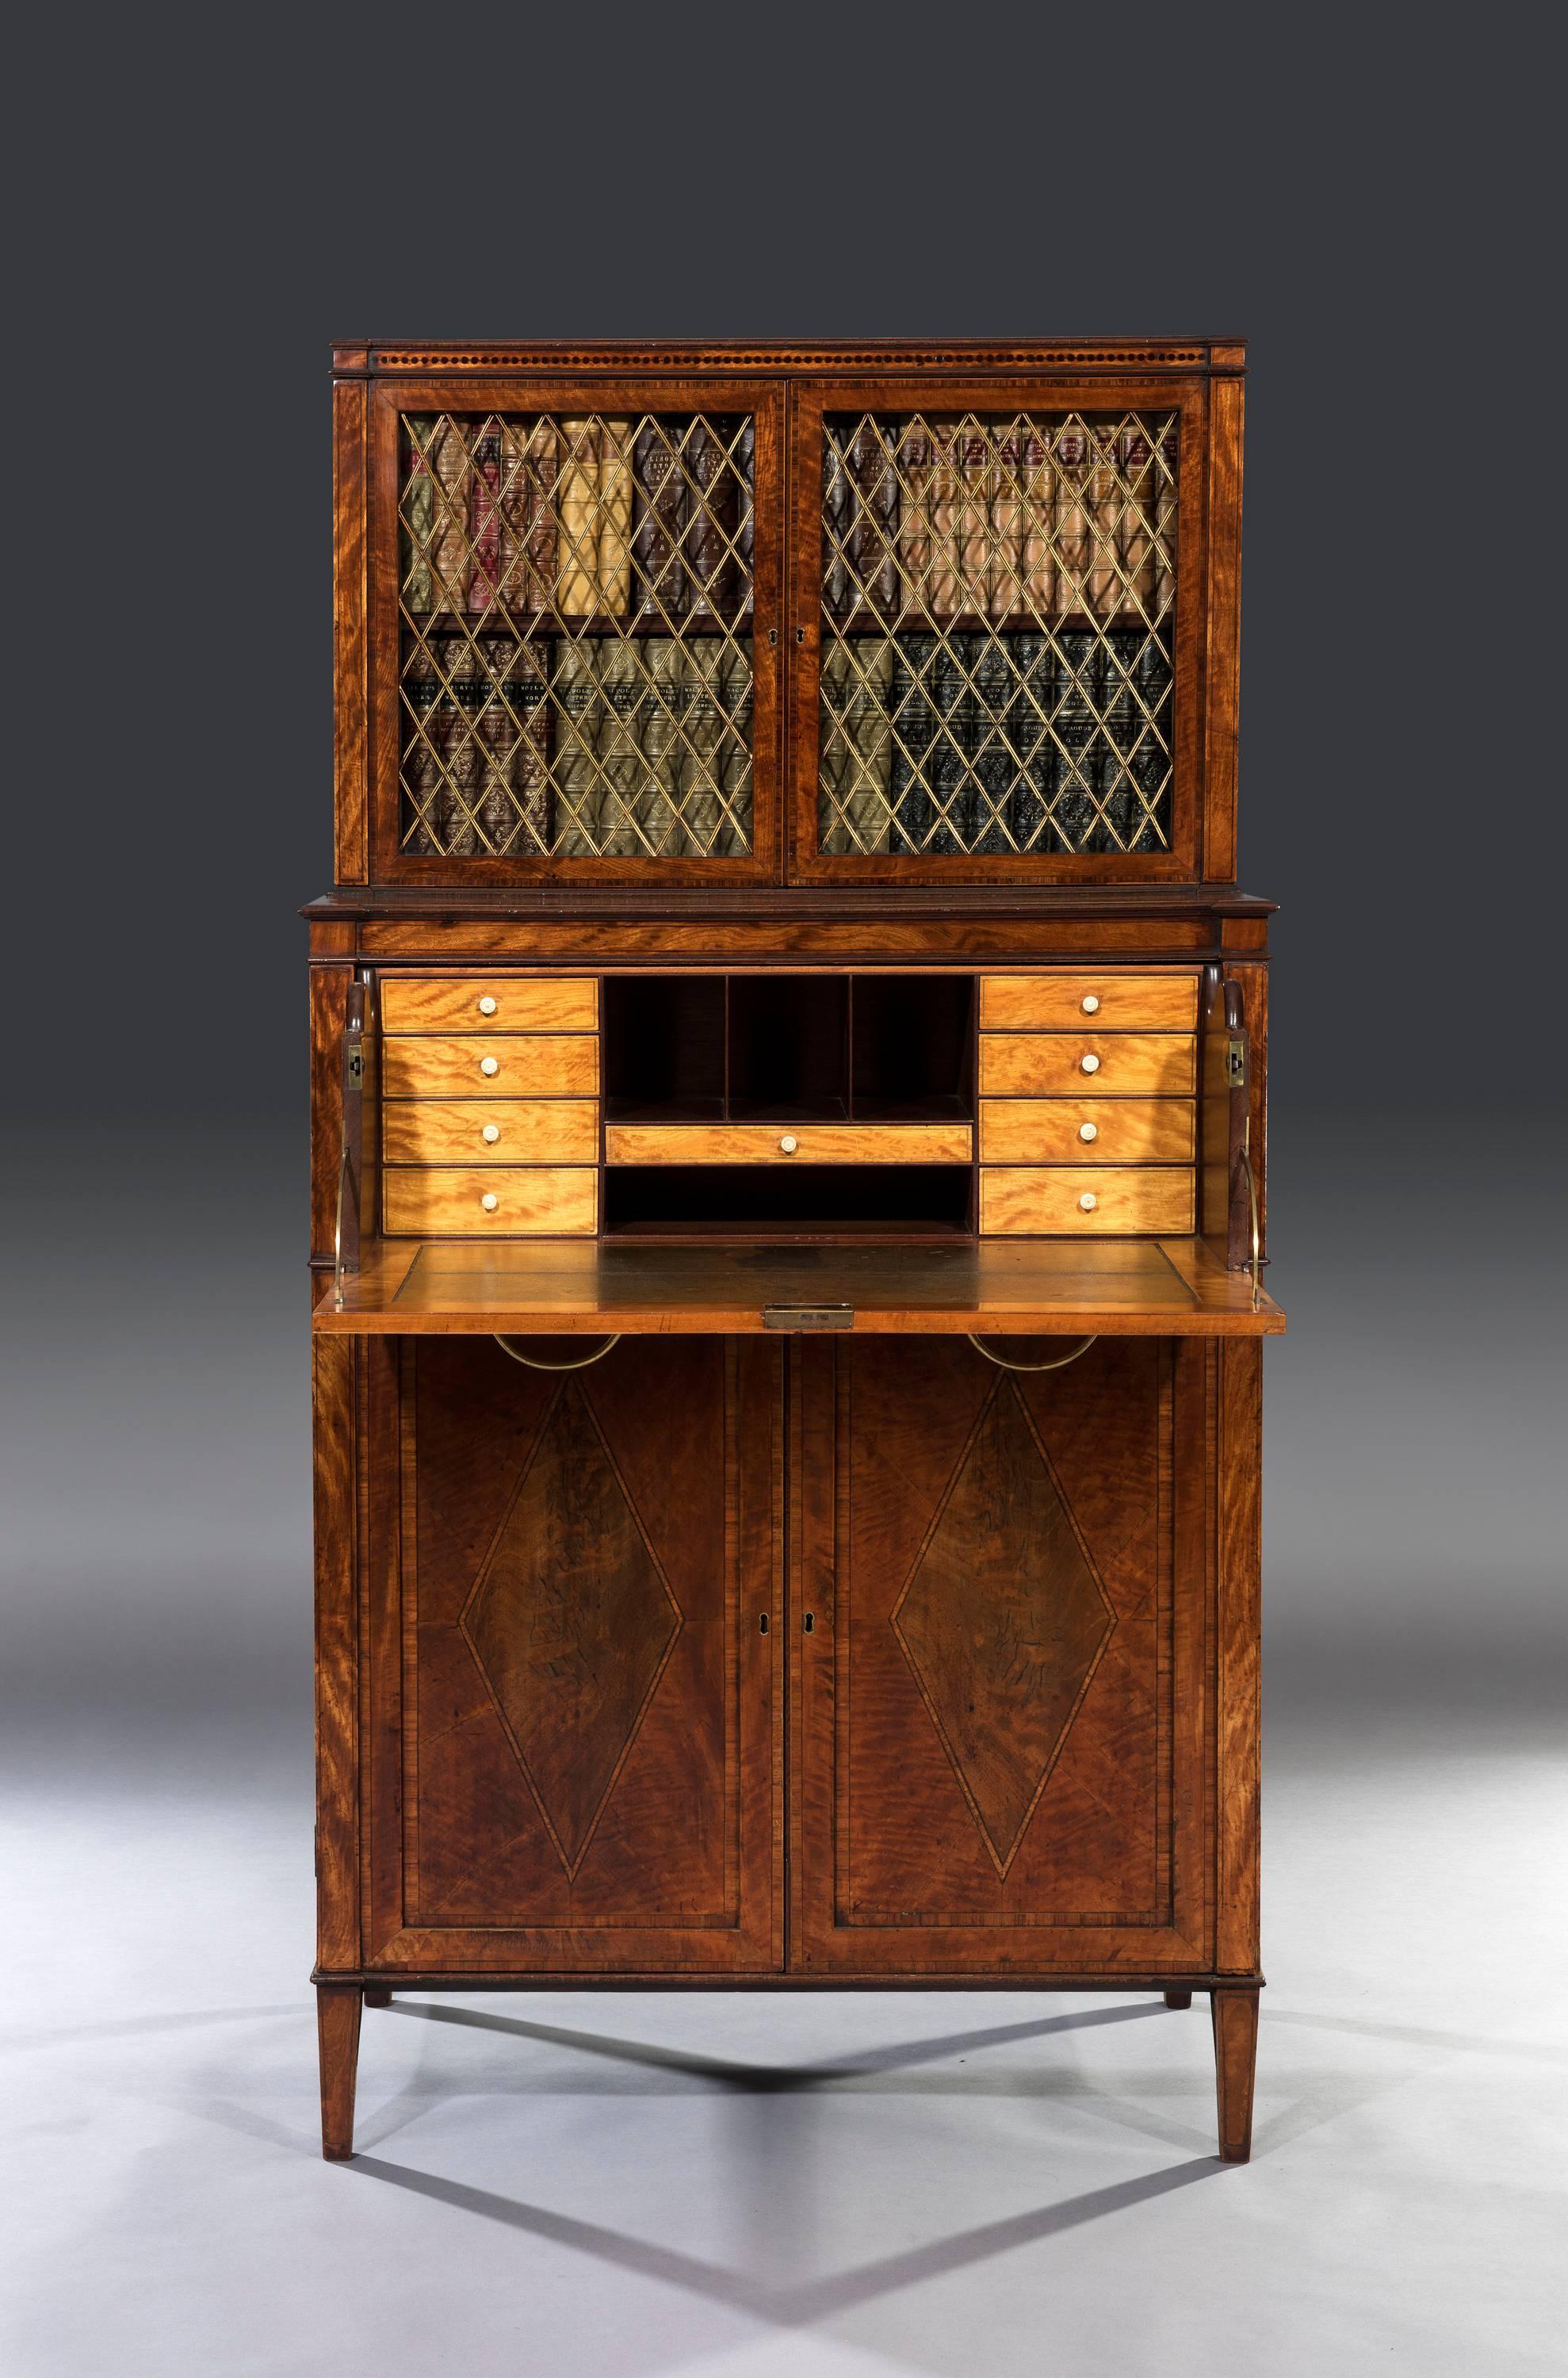 English George III Sheraton 18th Century Satinwood Inlaid Secrétaire Dwarf Bookcase For Sale